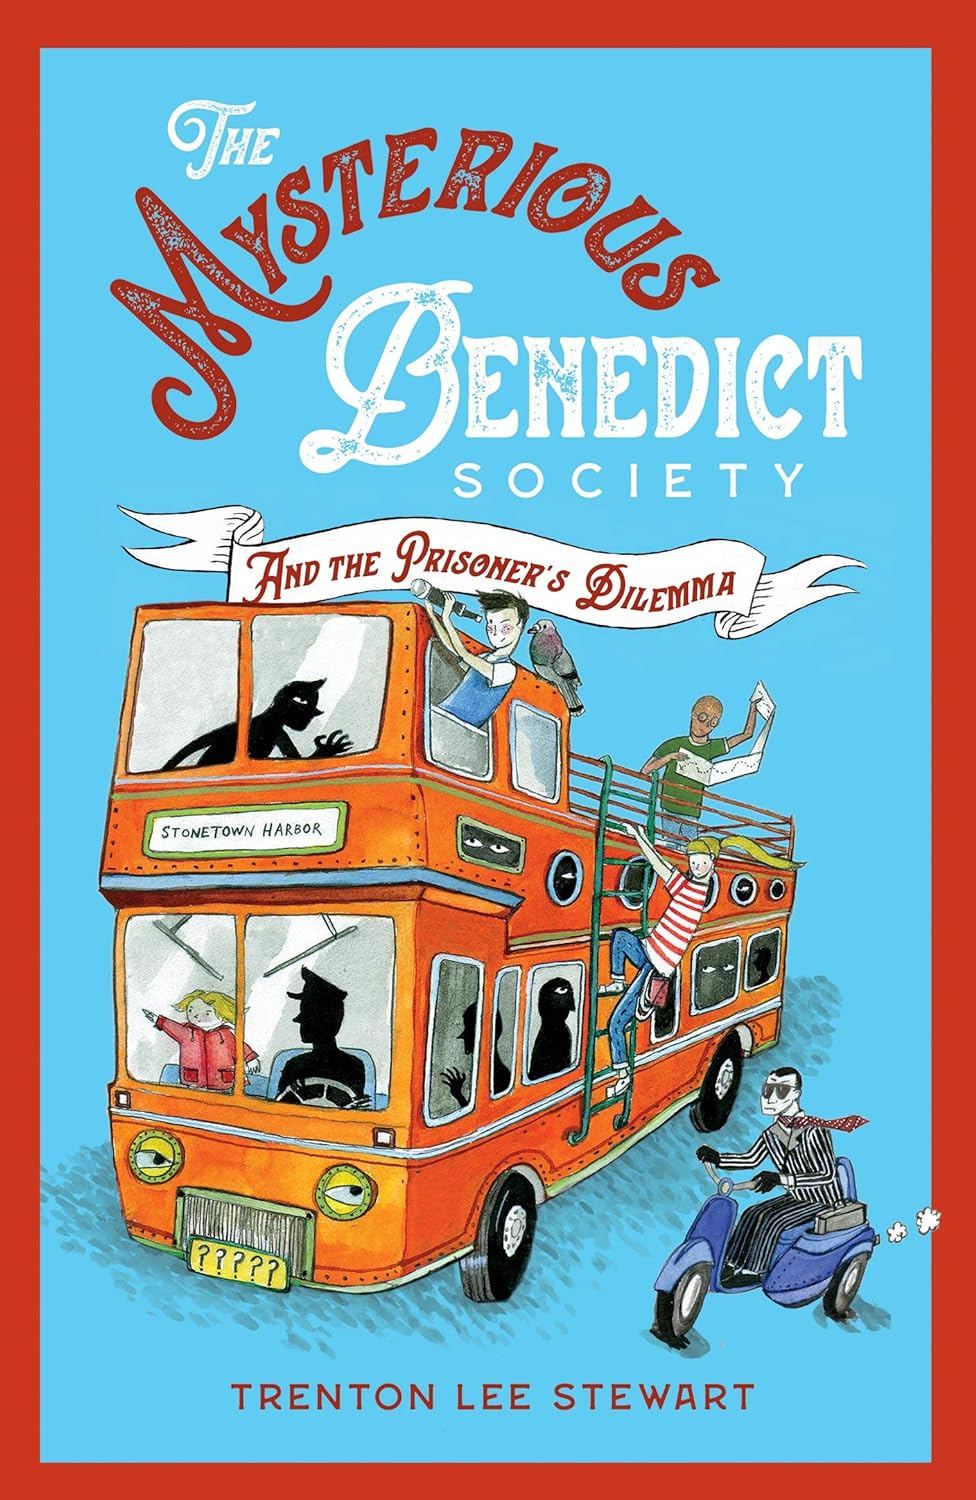 Hurry! Get the Mysterious Benedict Society and the Prisoner's Dilemma for Only £5.44!